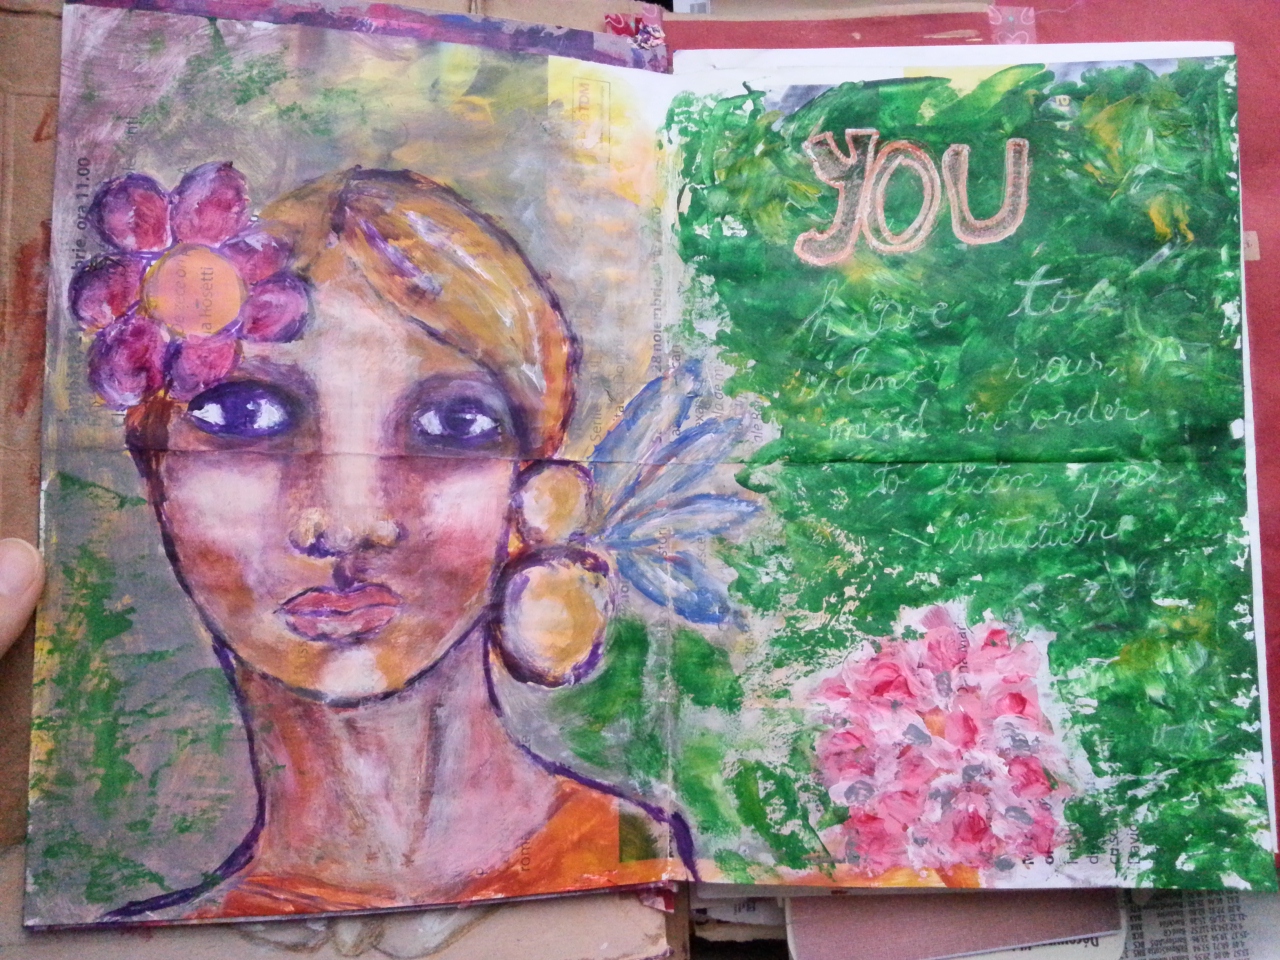 The junk journal project - leaflet painting over by Cristina Parus @ creativemag.ro